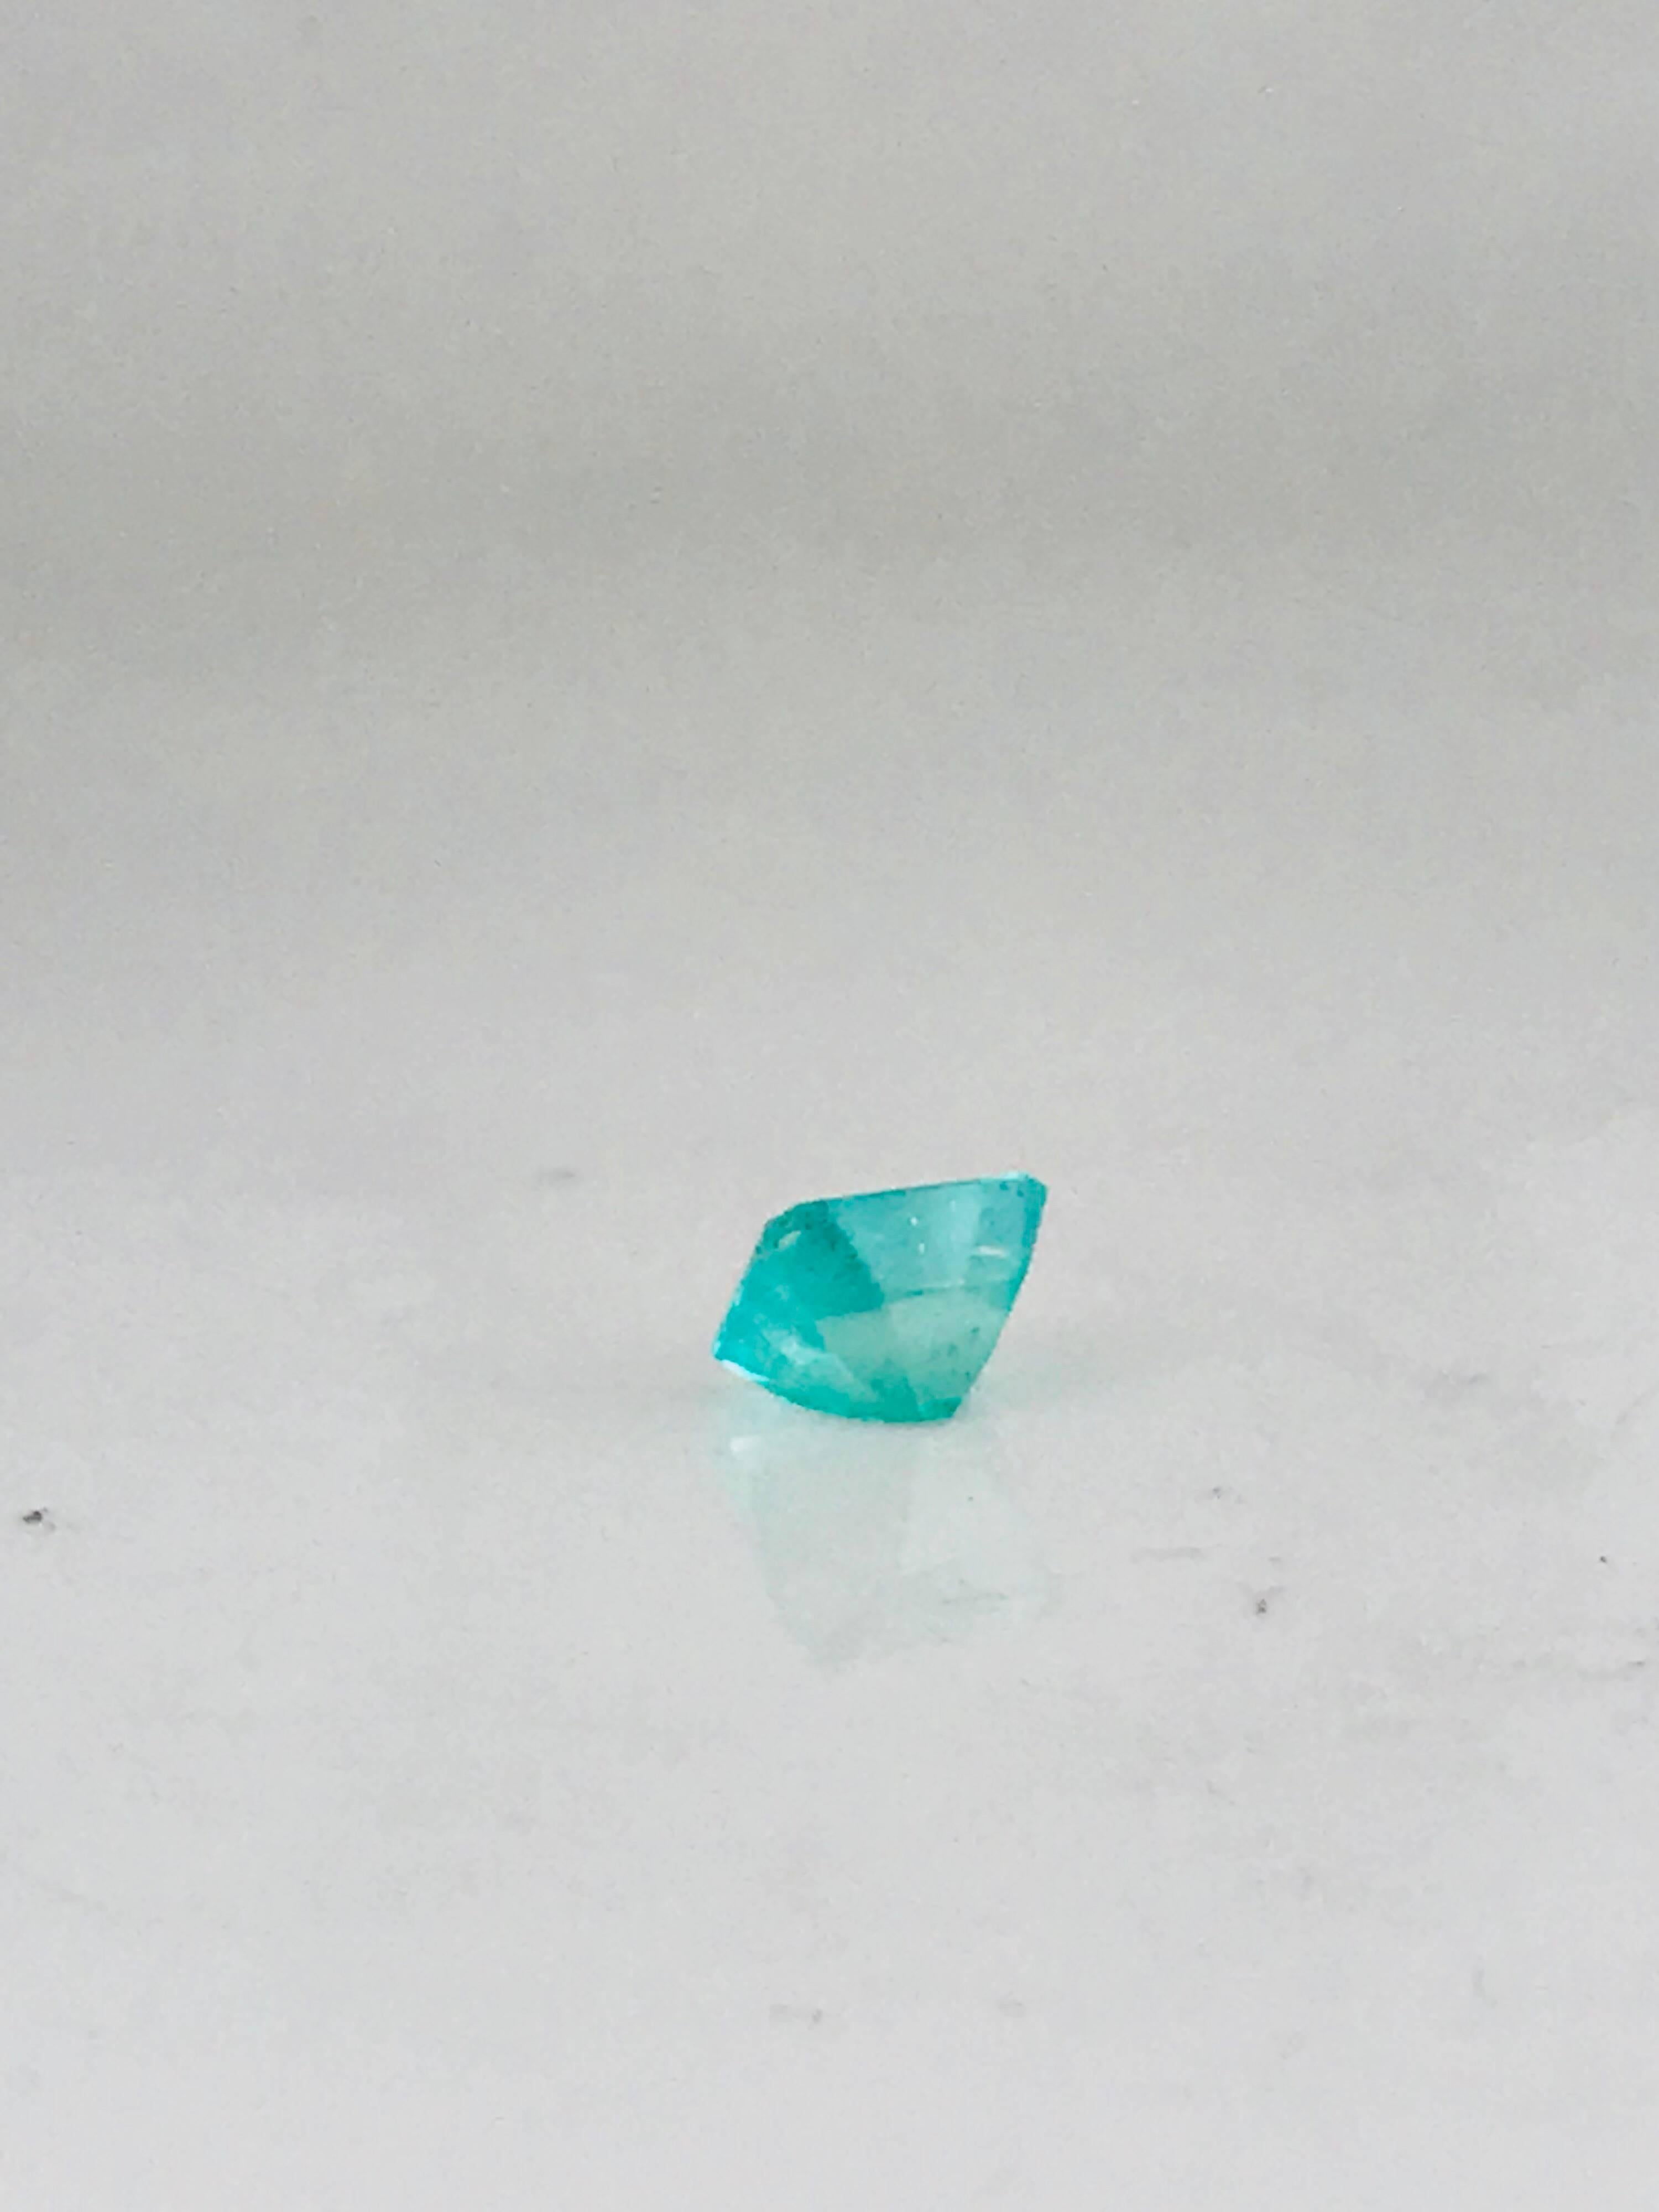 Beautiful, princess-cut Colombian Emerald measures 5.53 mm x 7.90 mm x 8.12 mm in diameter, and weighs 2.25 carat.

The color is a translucent, green Beryl Emerald stone


GIA Gemologist inspected & evaluated.

